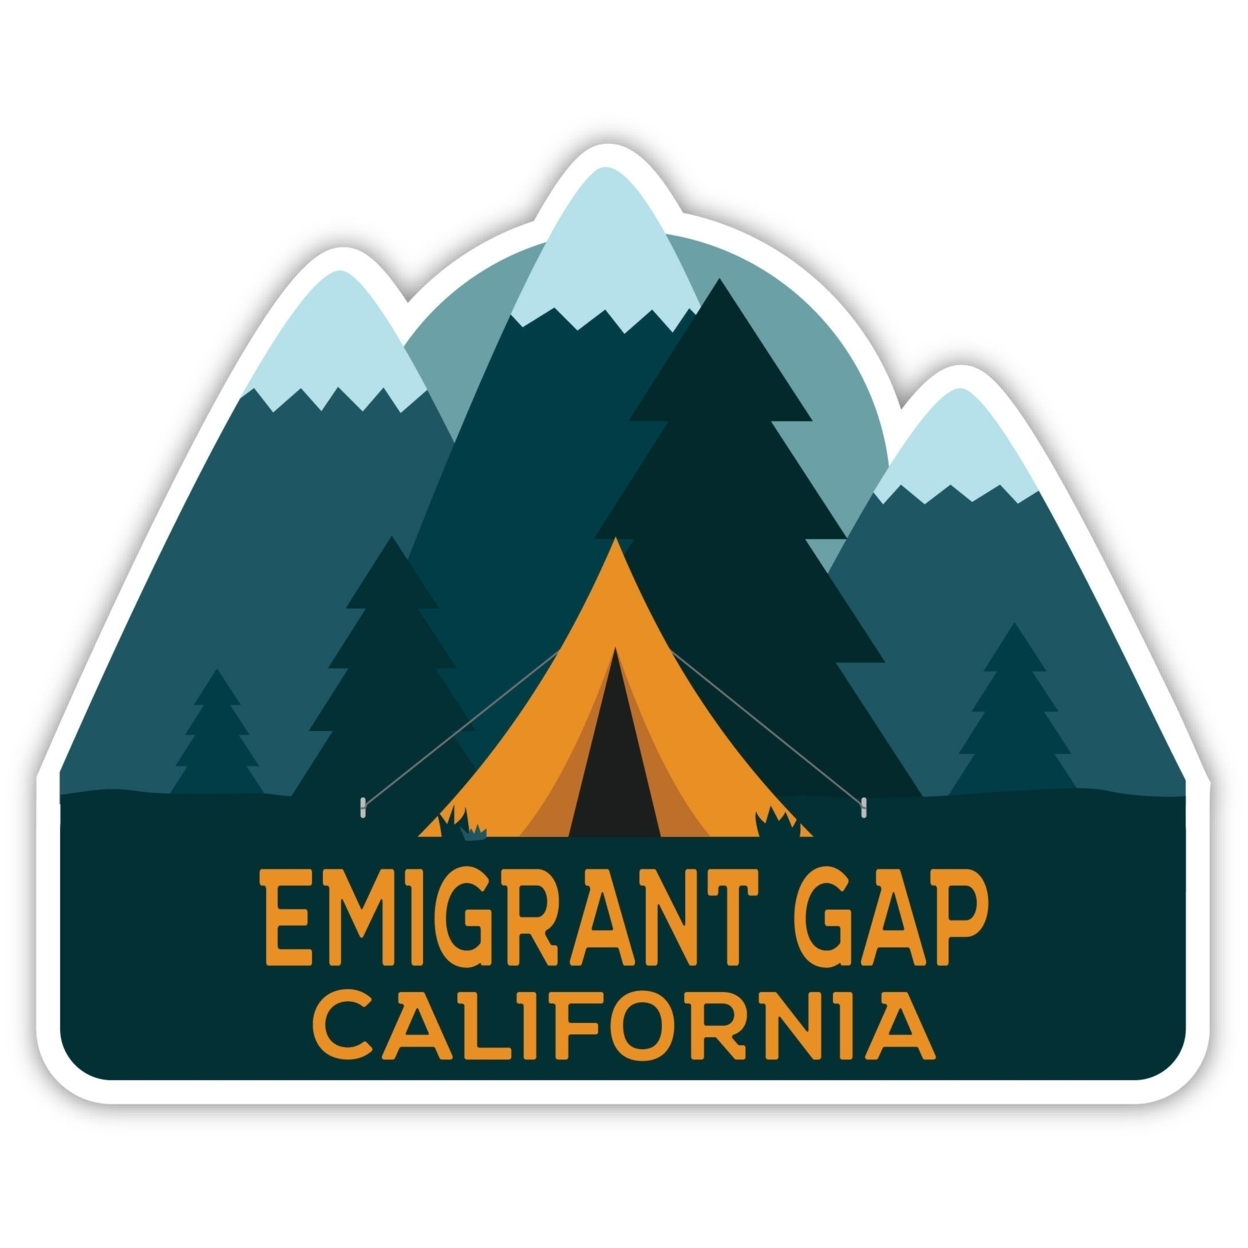 Emigrant Gap California Souvenir Decorative Stickers (Choose Theme And Size) - 4-Pack, 12-Inch, Tent